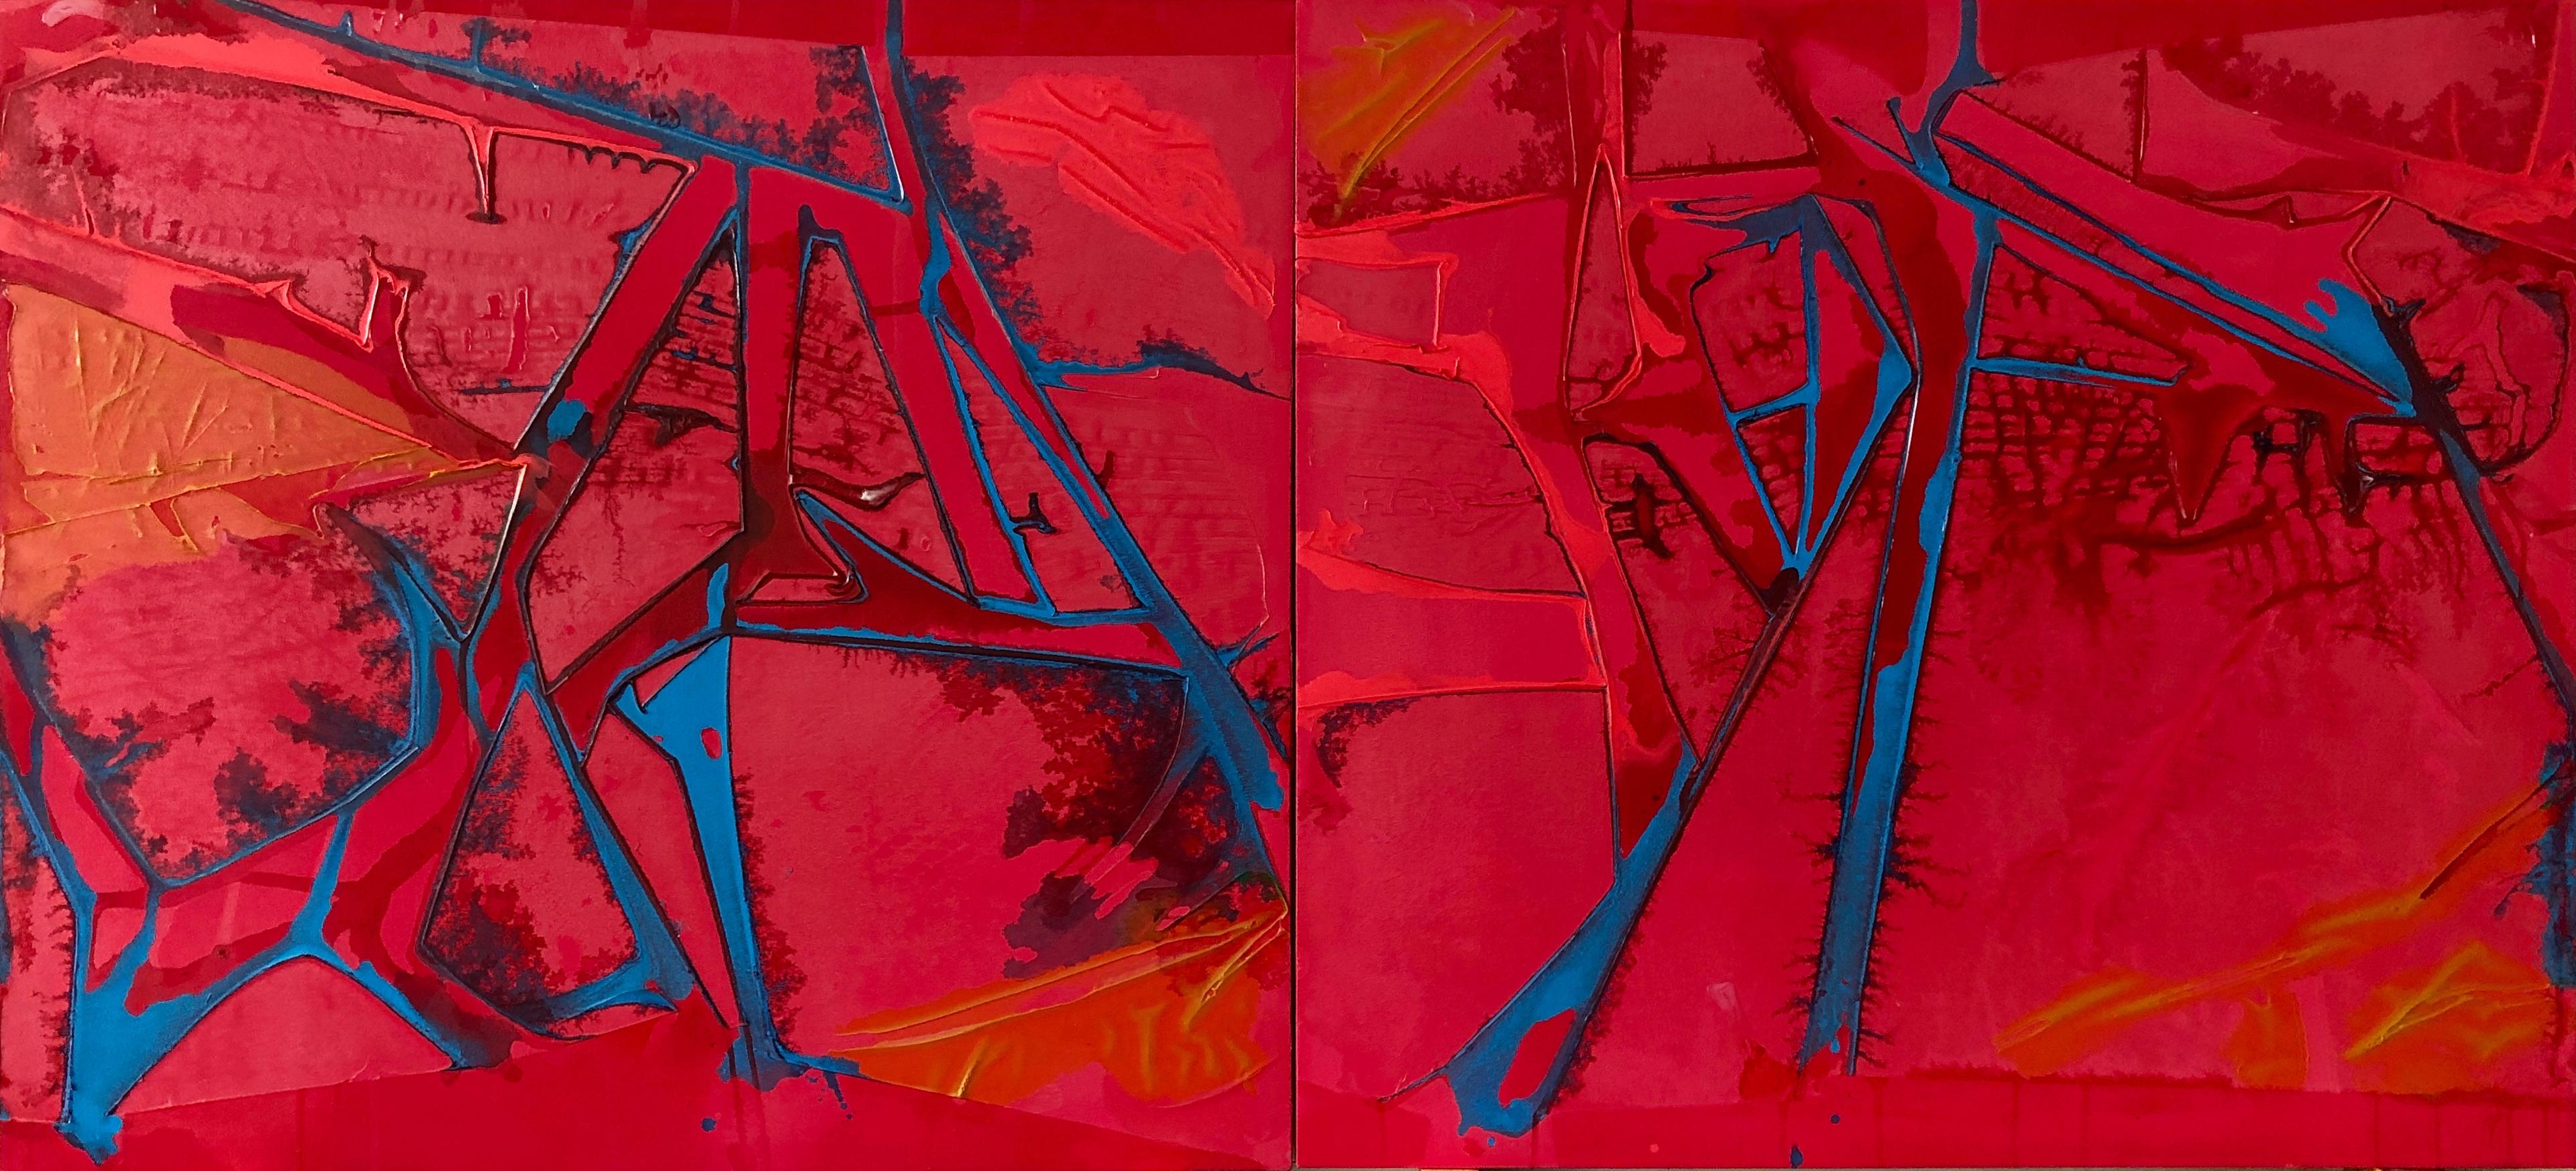 "TEARS OF RAGE", Abstract Painting, Diptych, Acrylic on Canvas, Red, Blue